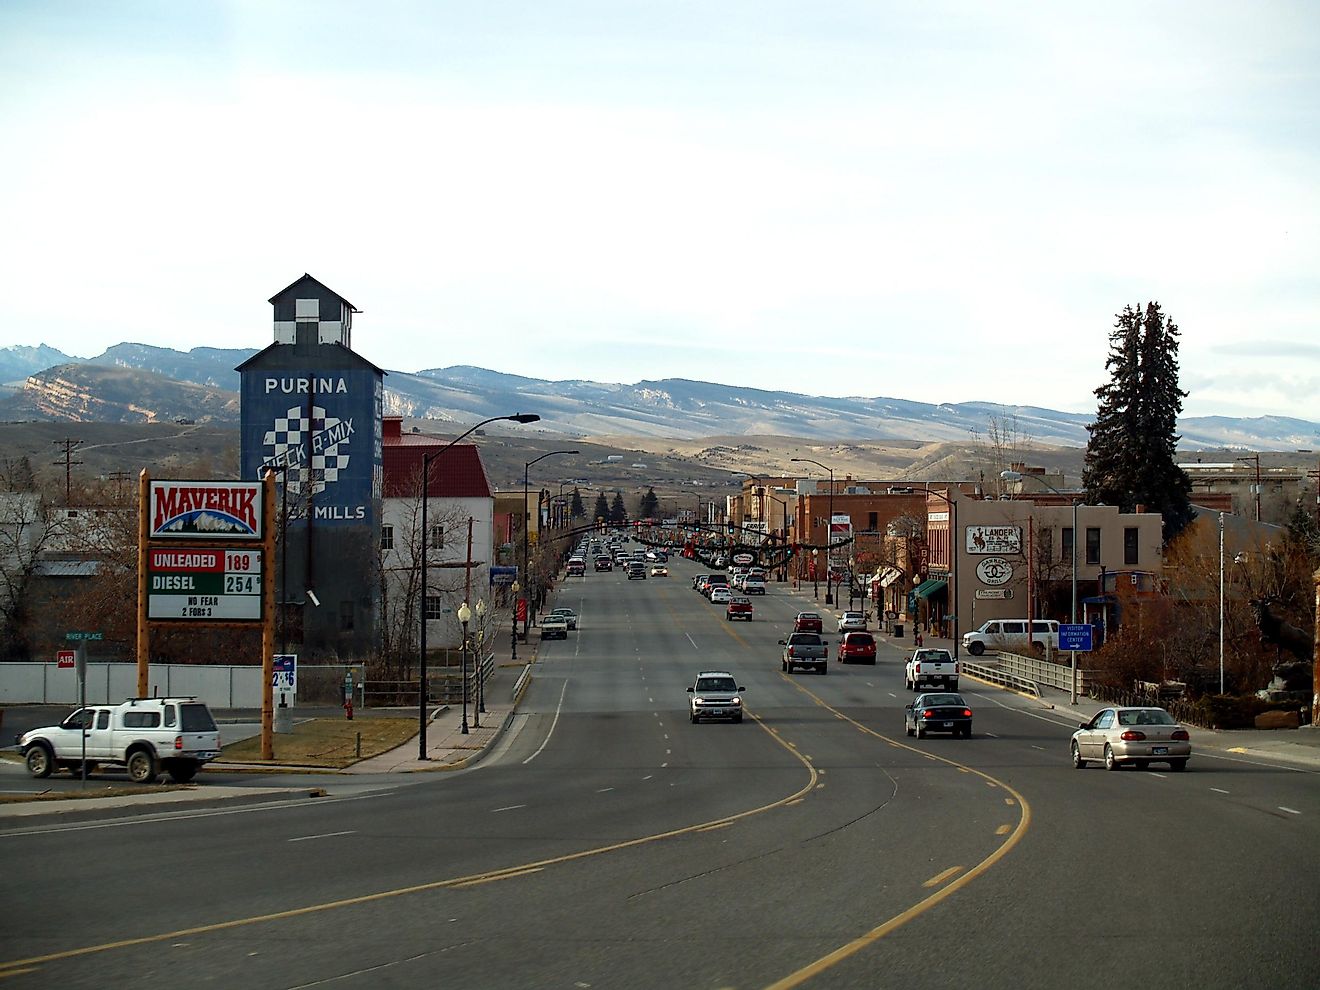 Downtown Lander, Wyoming. Image credit Charles Willgren from Fort Collins, Colorado, United States - Downtown LanderUploaded by PDTillman, Charles Willgren from Fort Collins, Colorado, United States, CC BY 2.0, File:Lander, WY.jpg - Wikimedia Commons